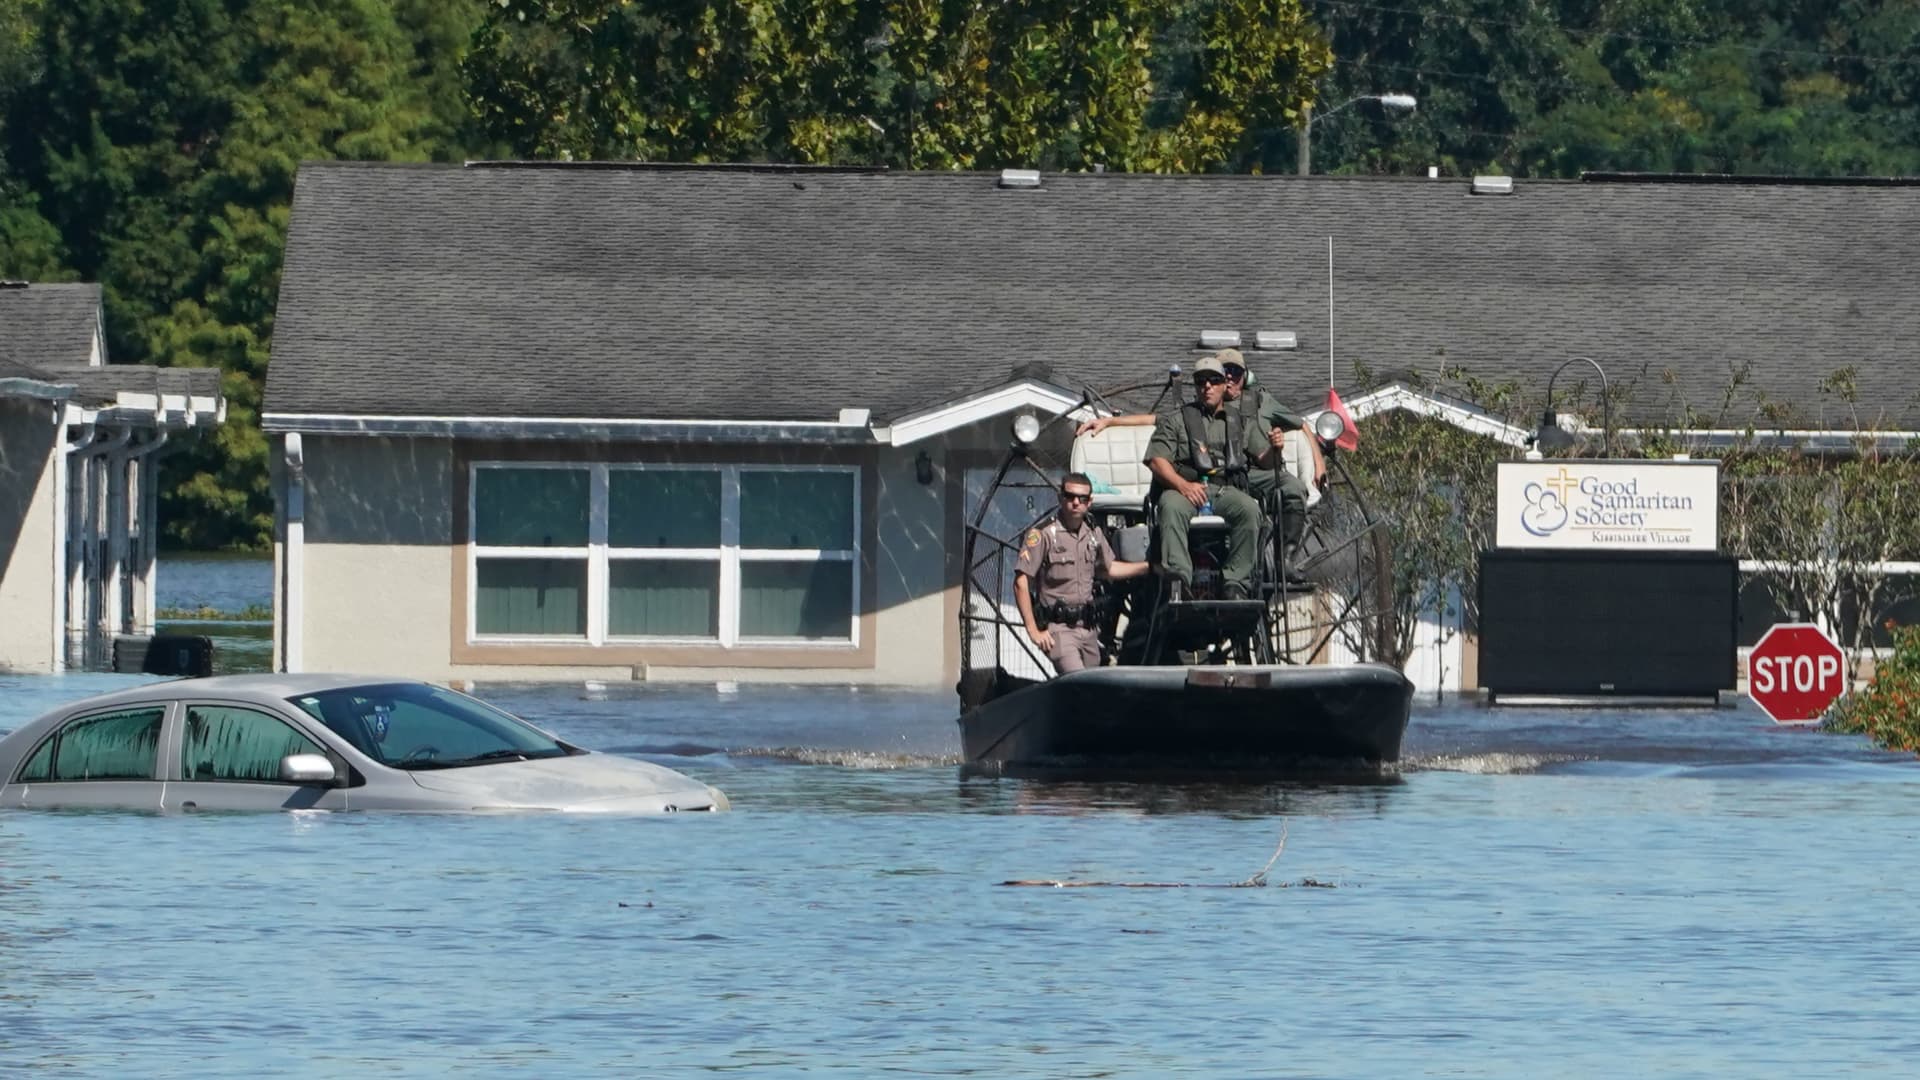 Osceola County Sheriffs use a fanboat as they urge residents to leave the flooded Good Samaritan Society Village, following Hurricane Ian on September 30, 2022 in Kissimmee, Florida.